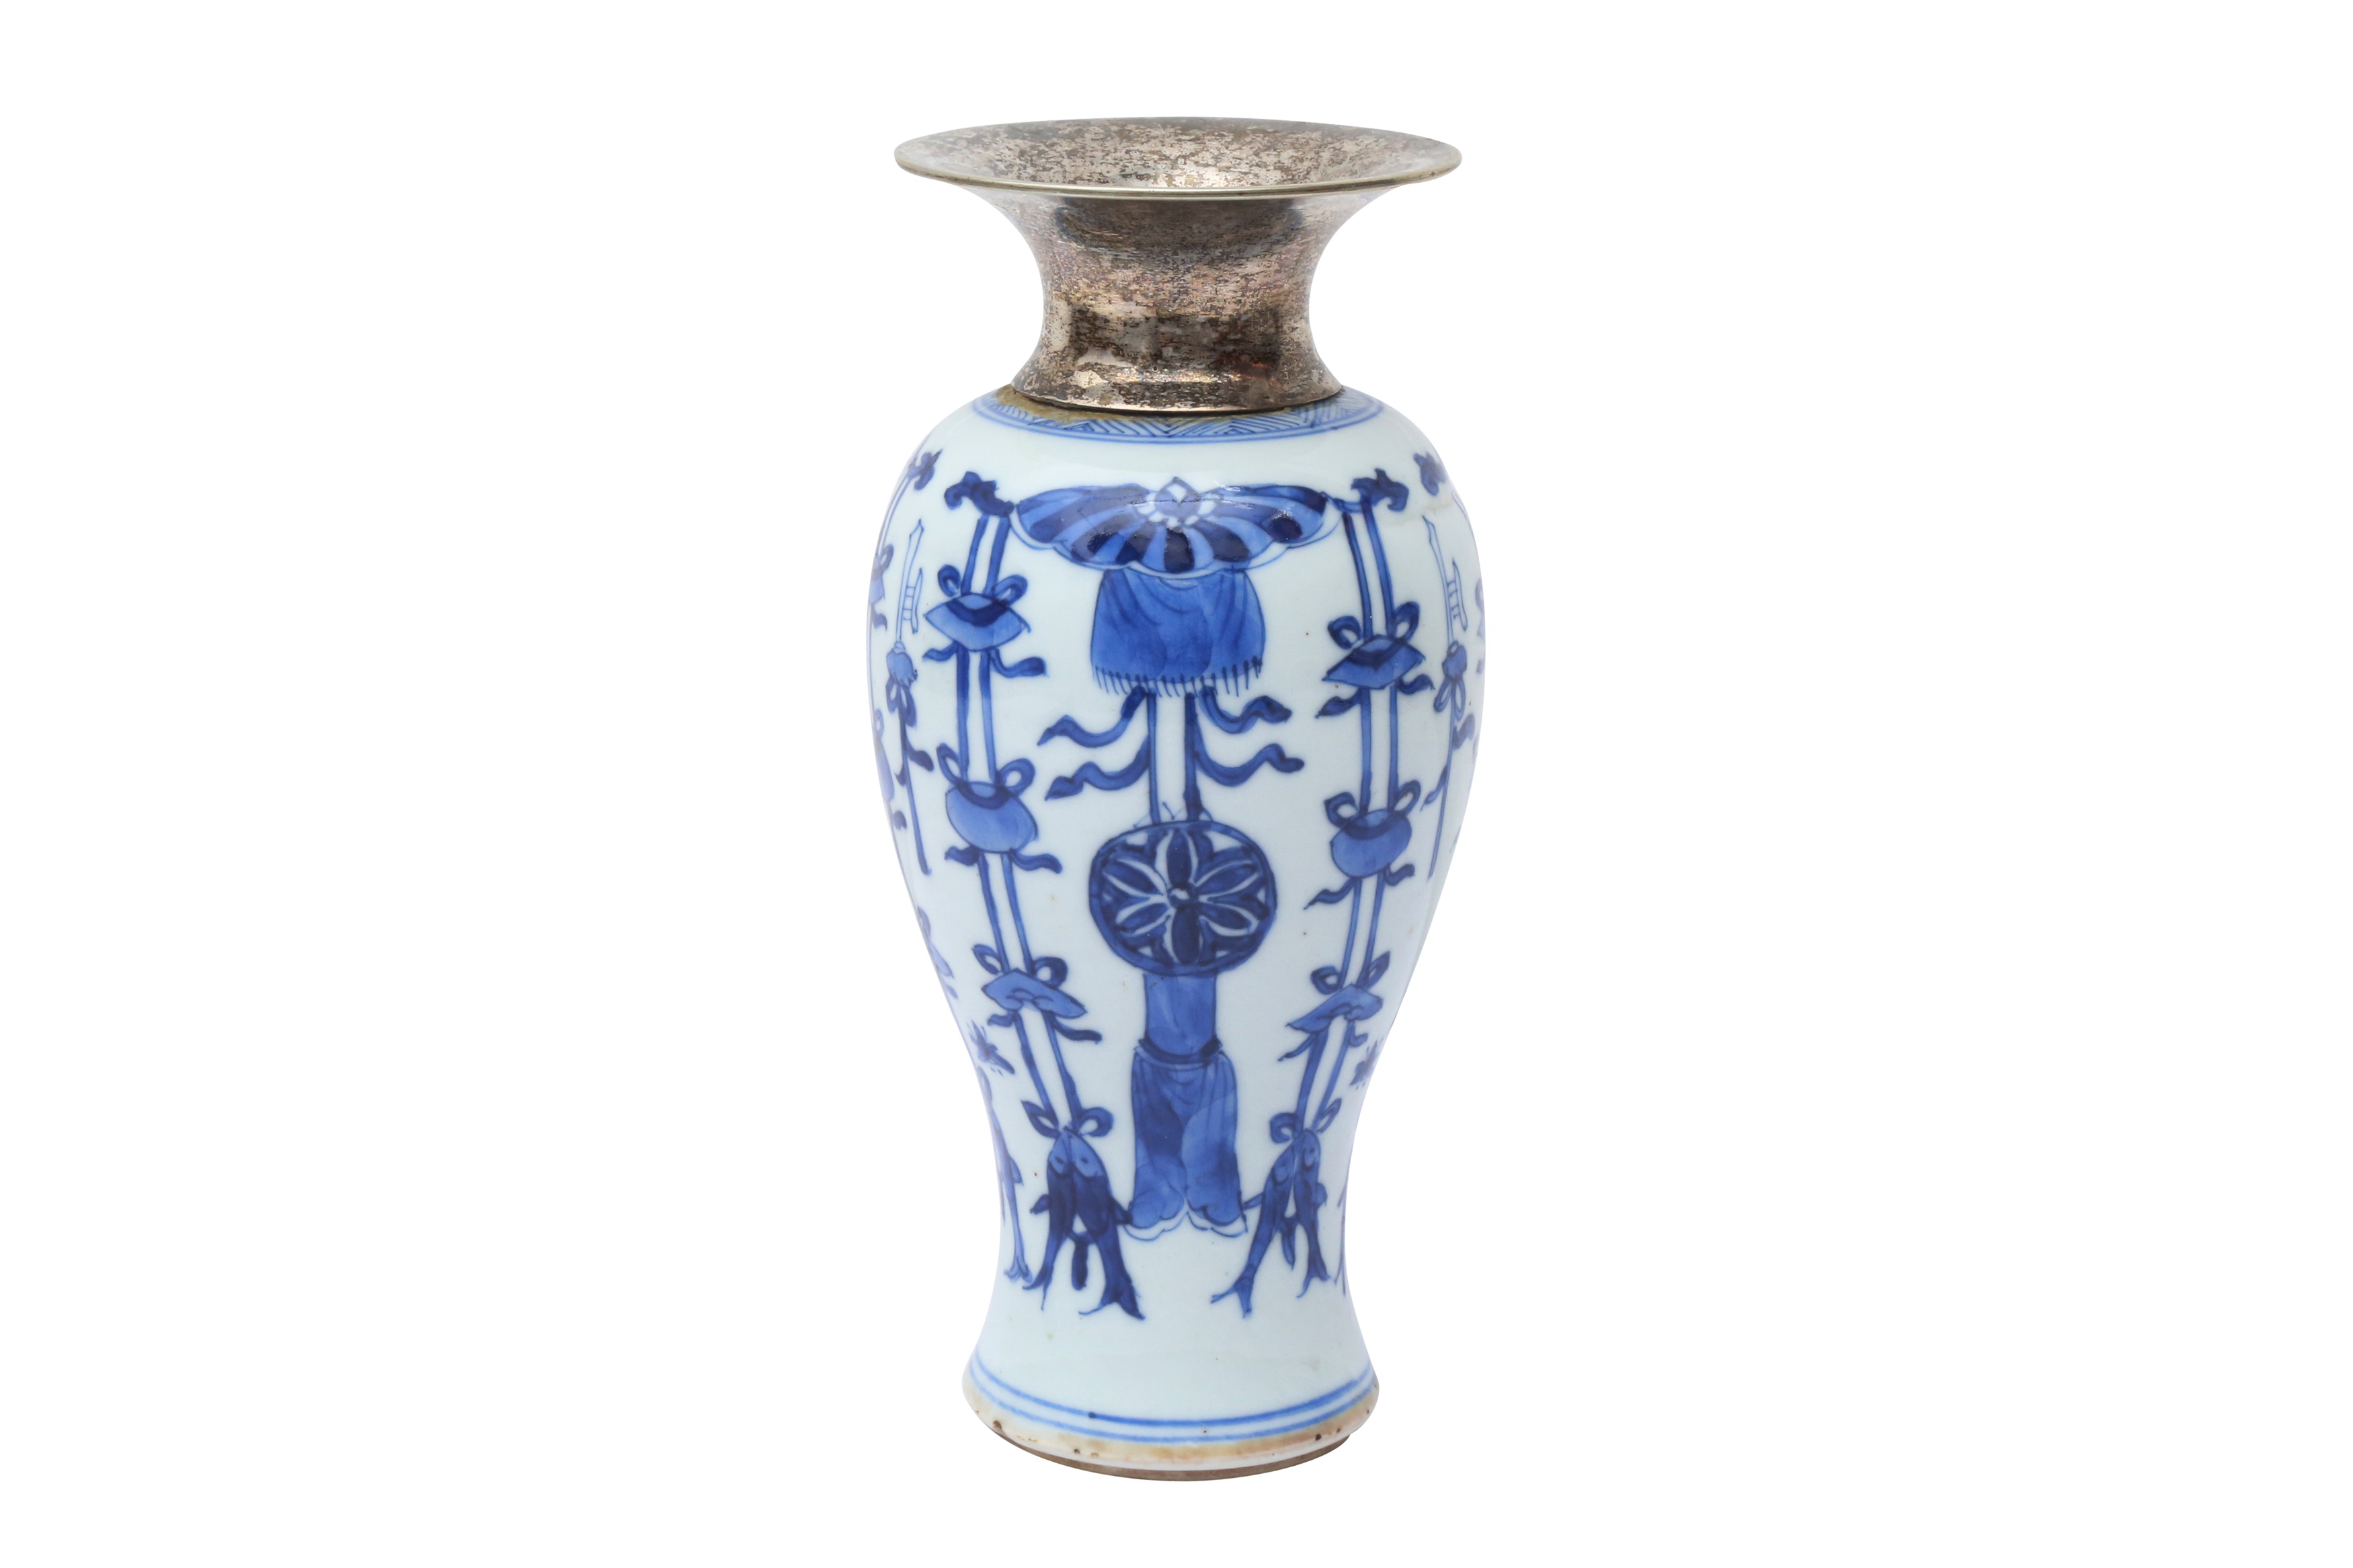 A CHINESE BLUE AND WHITE VASE 清康熙 青花雙魚紋瓶